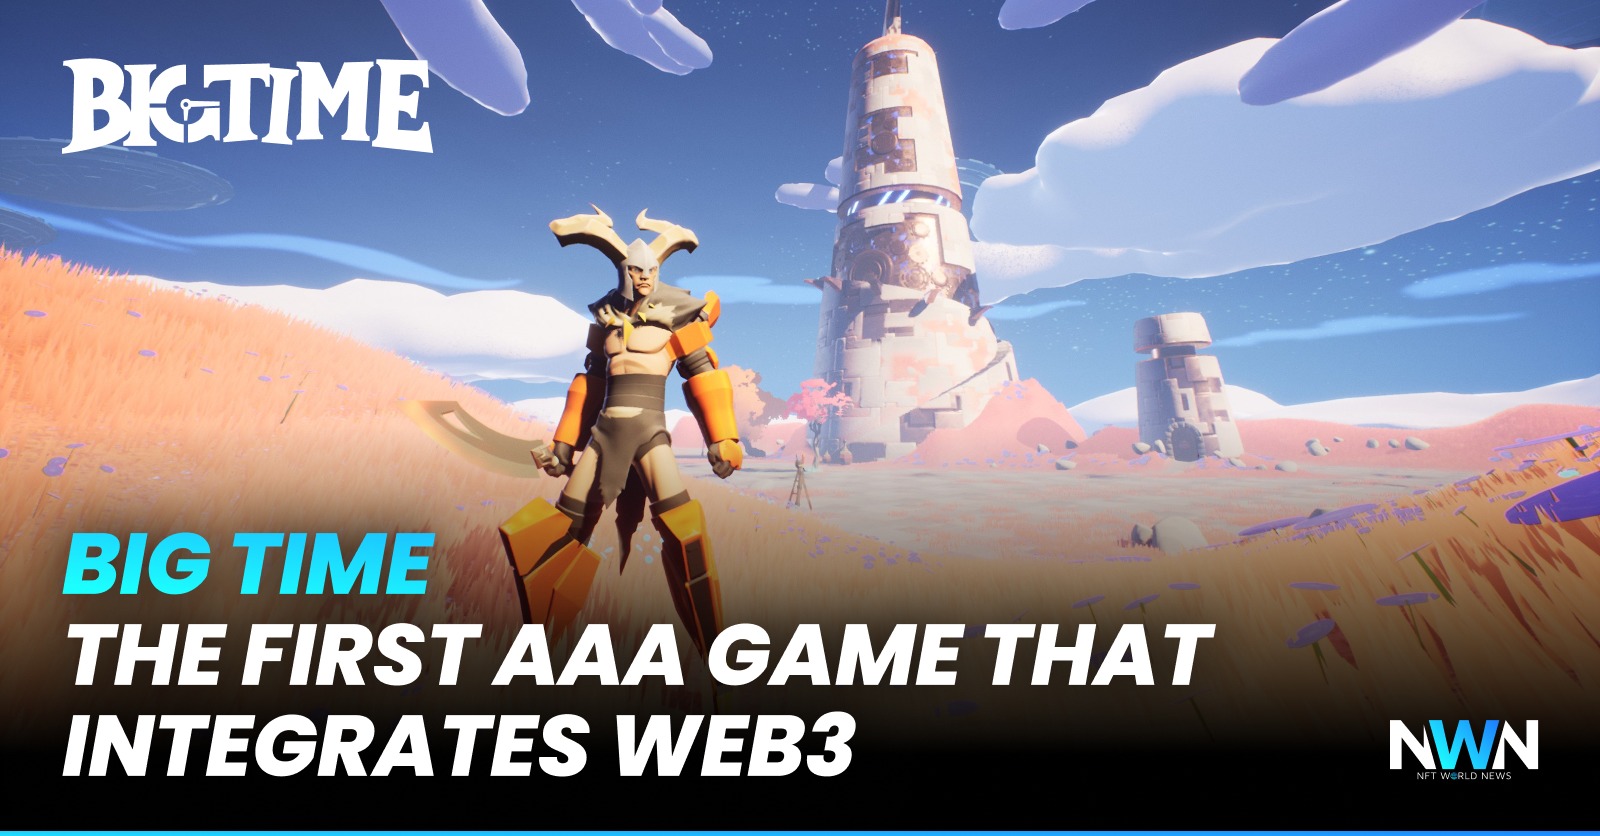 Big Time - The First AAA Game That Integrates Web3